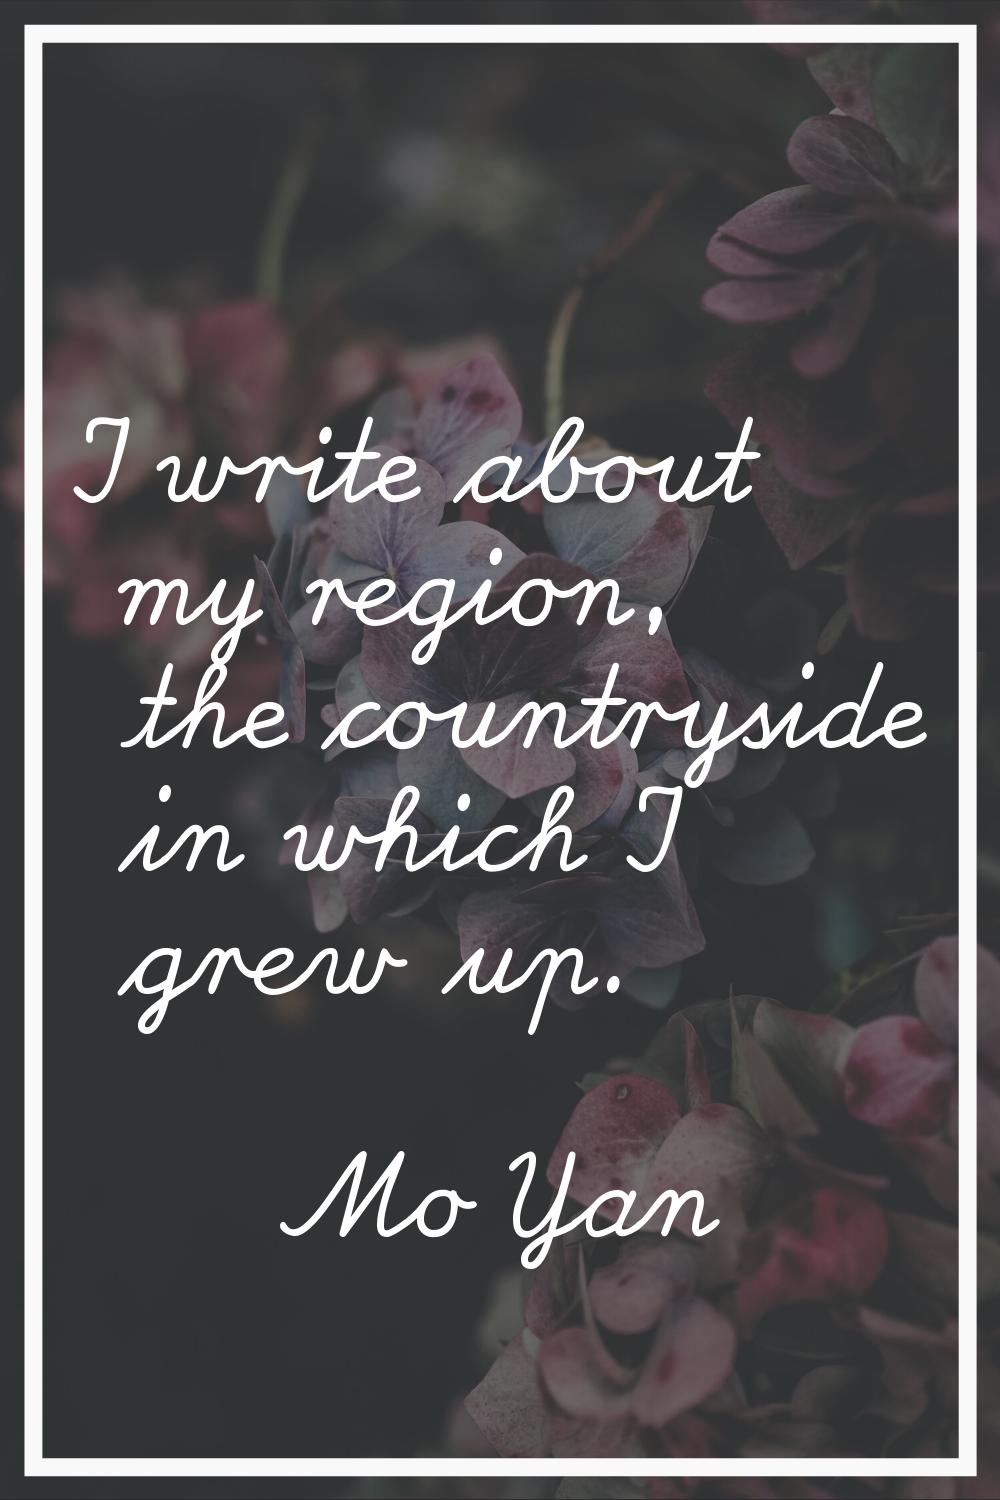 I write about my region, the countryside in which I grew up.